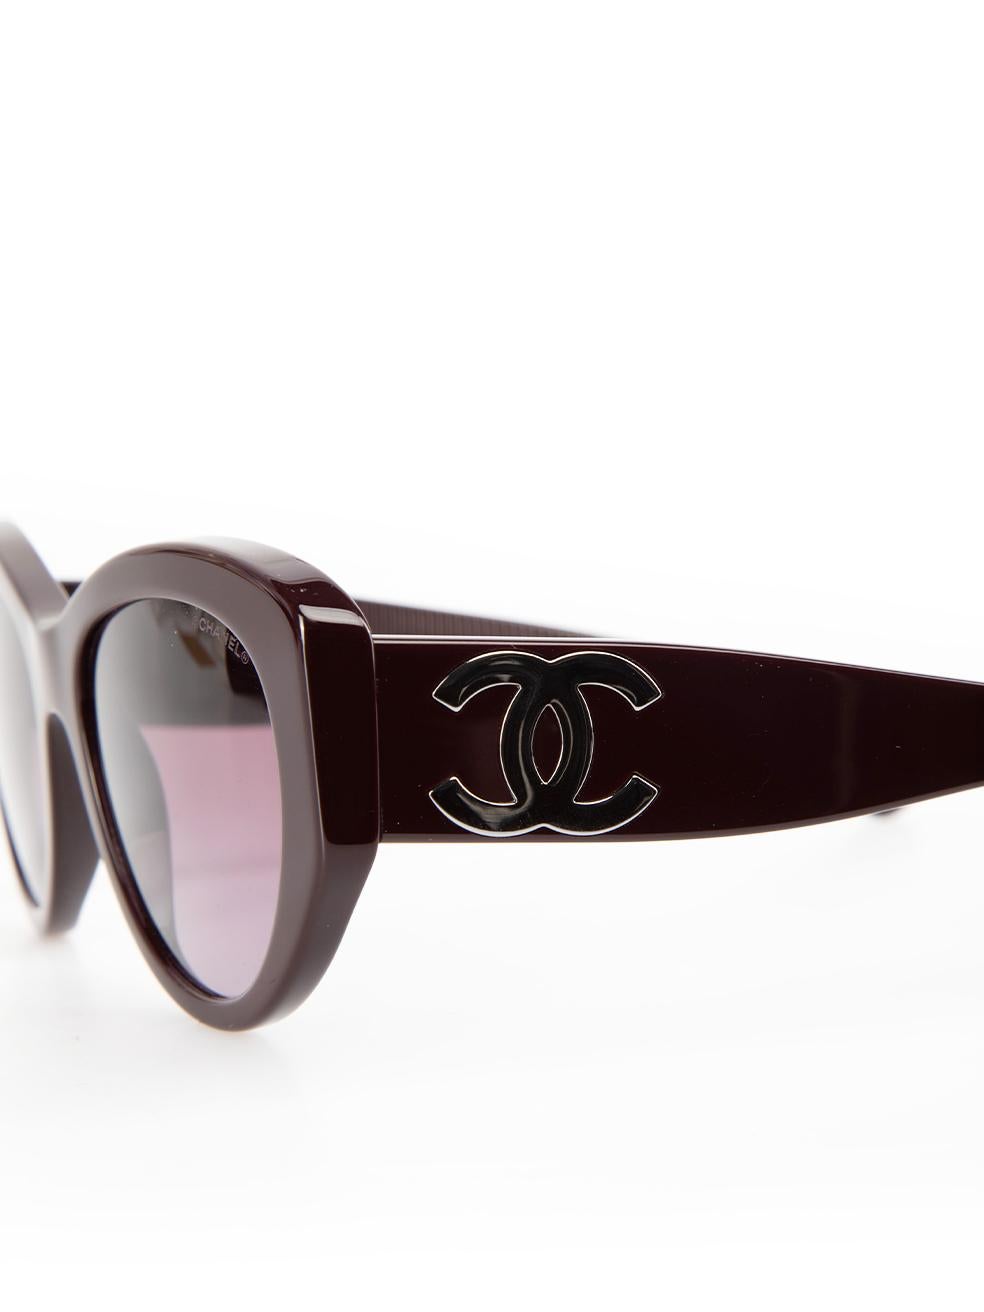 Chanel Purple Butterfly Frame Sunglasses For Sale 2